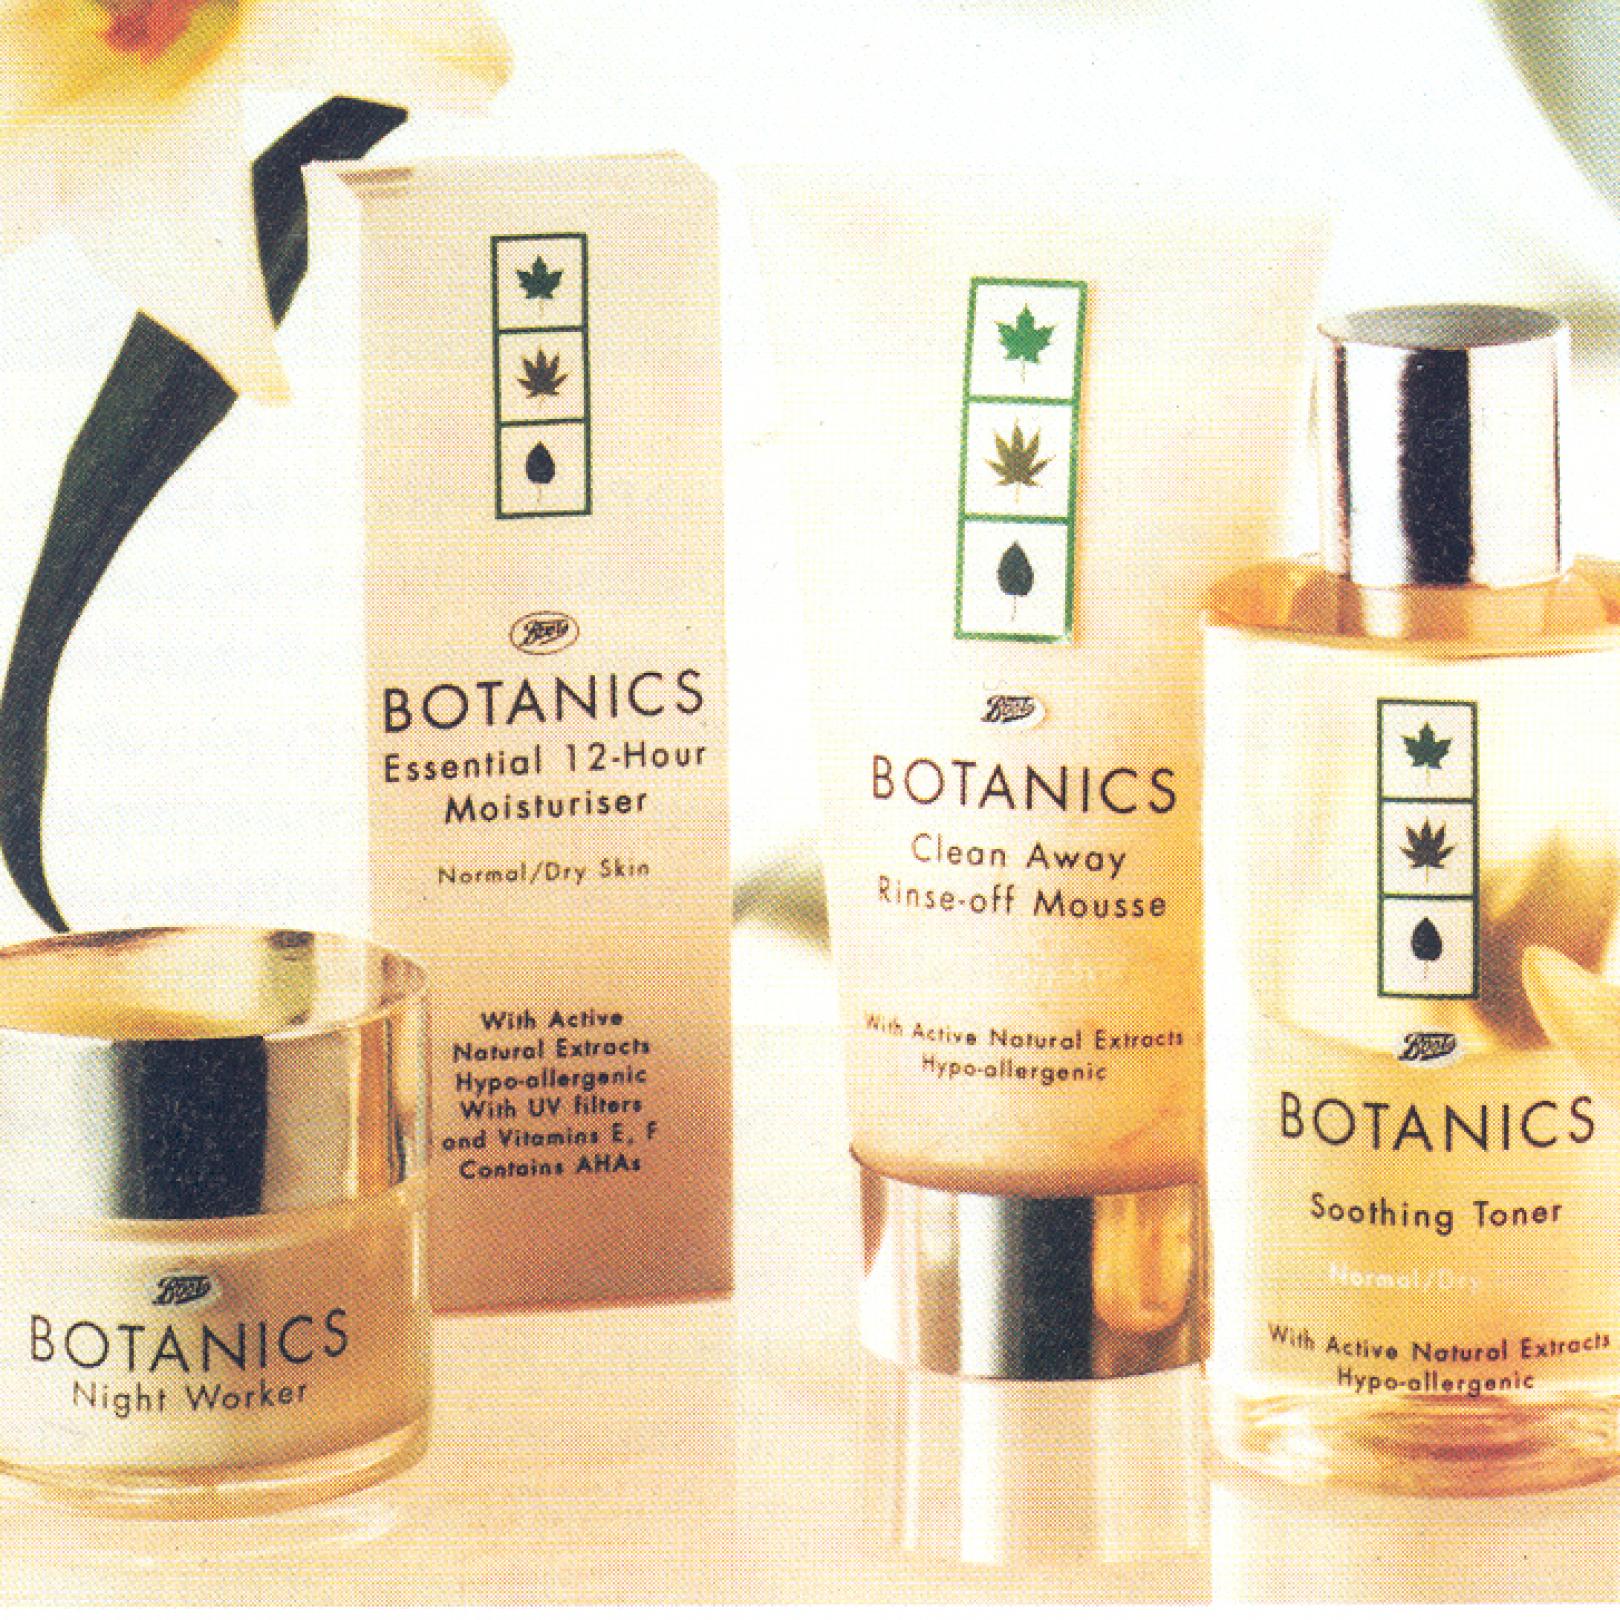 Four Botanics Products from first line launched in 1995